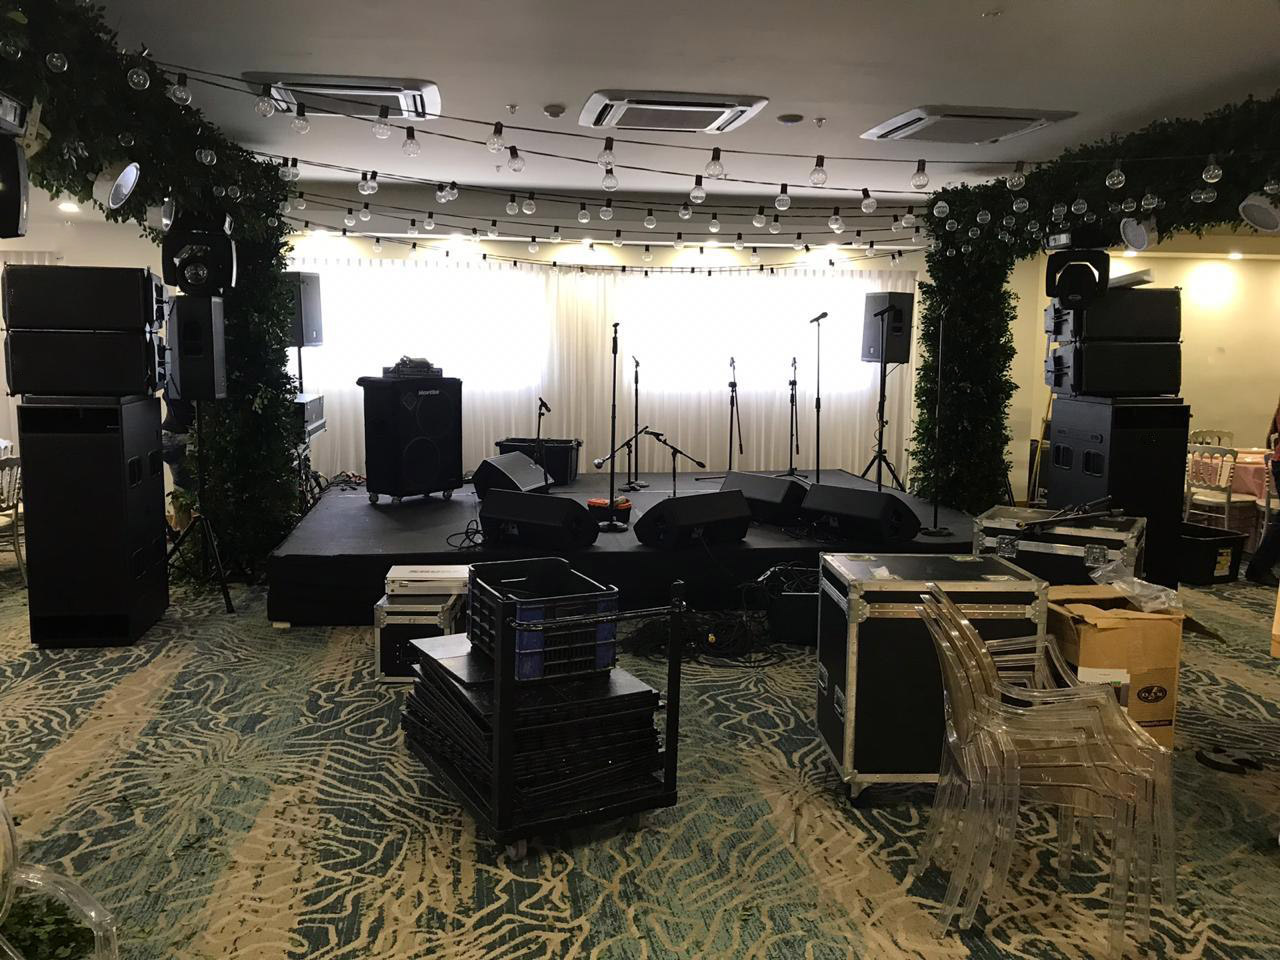 Sanway GEO S1210 Line Array and RS18 Subwoofer Supplied the 500 People Event